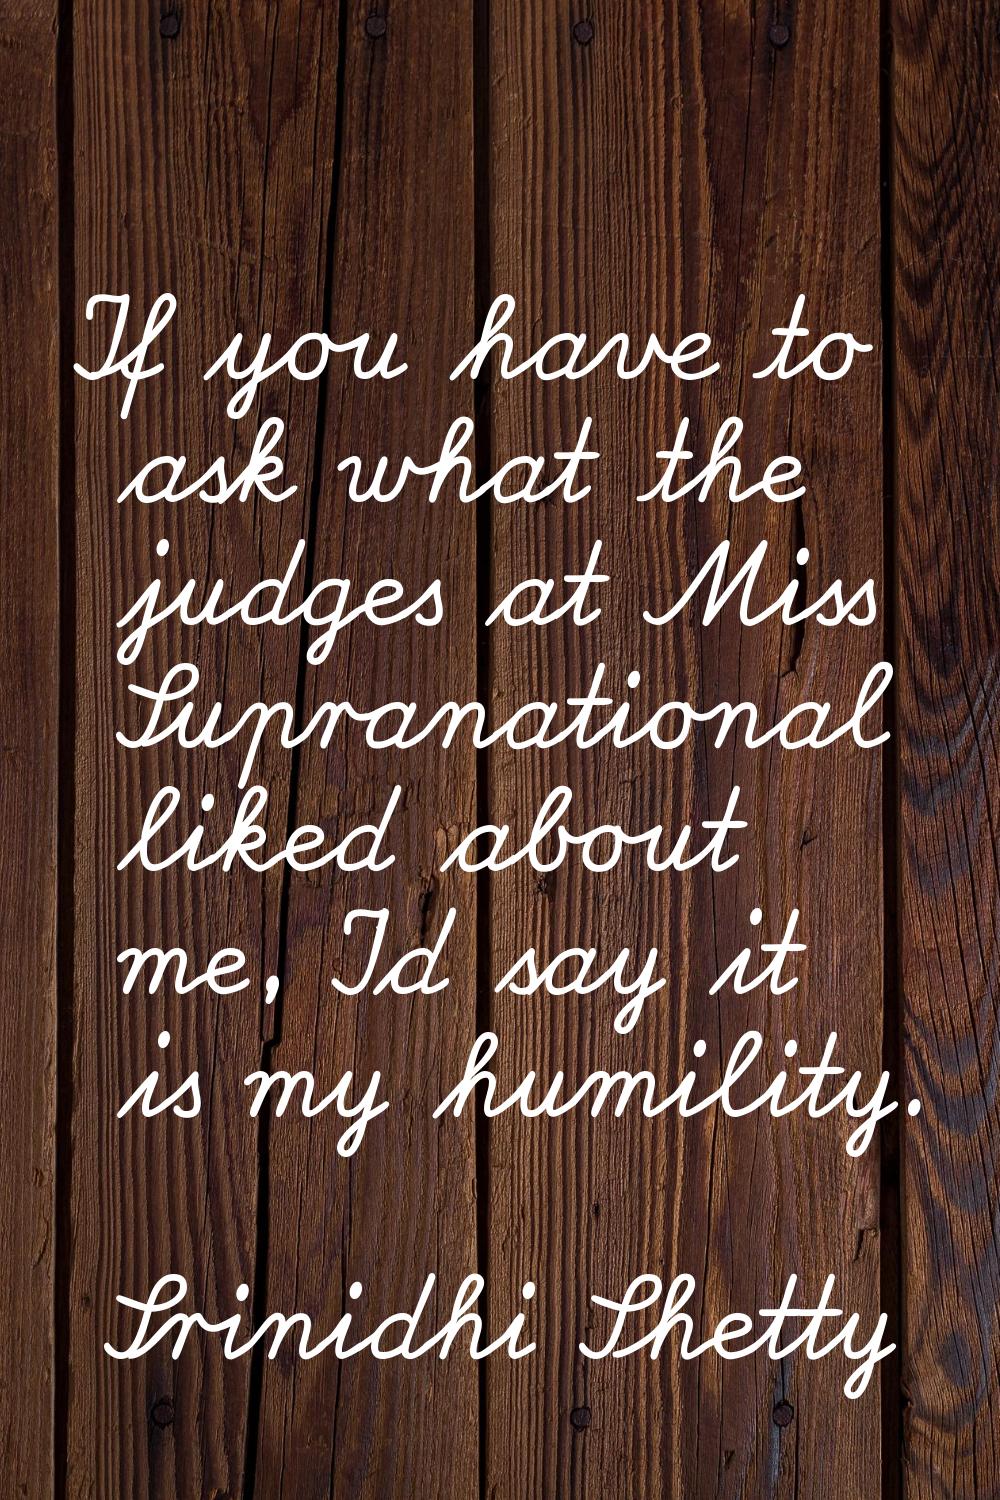 If you have to ask what the judges at Miss Supranational liked about me, I'd say it is my humility.